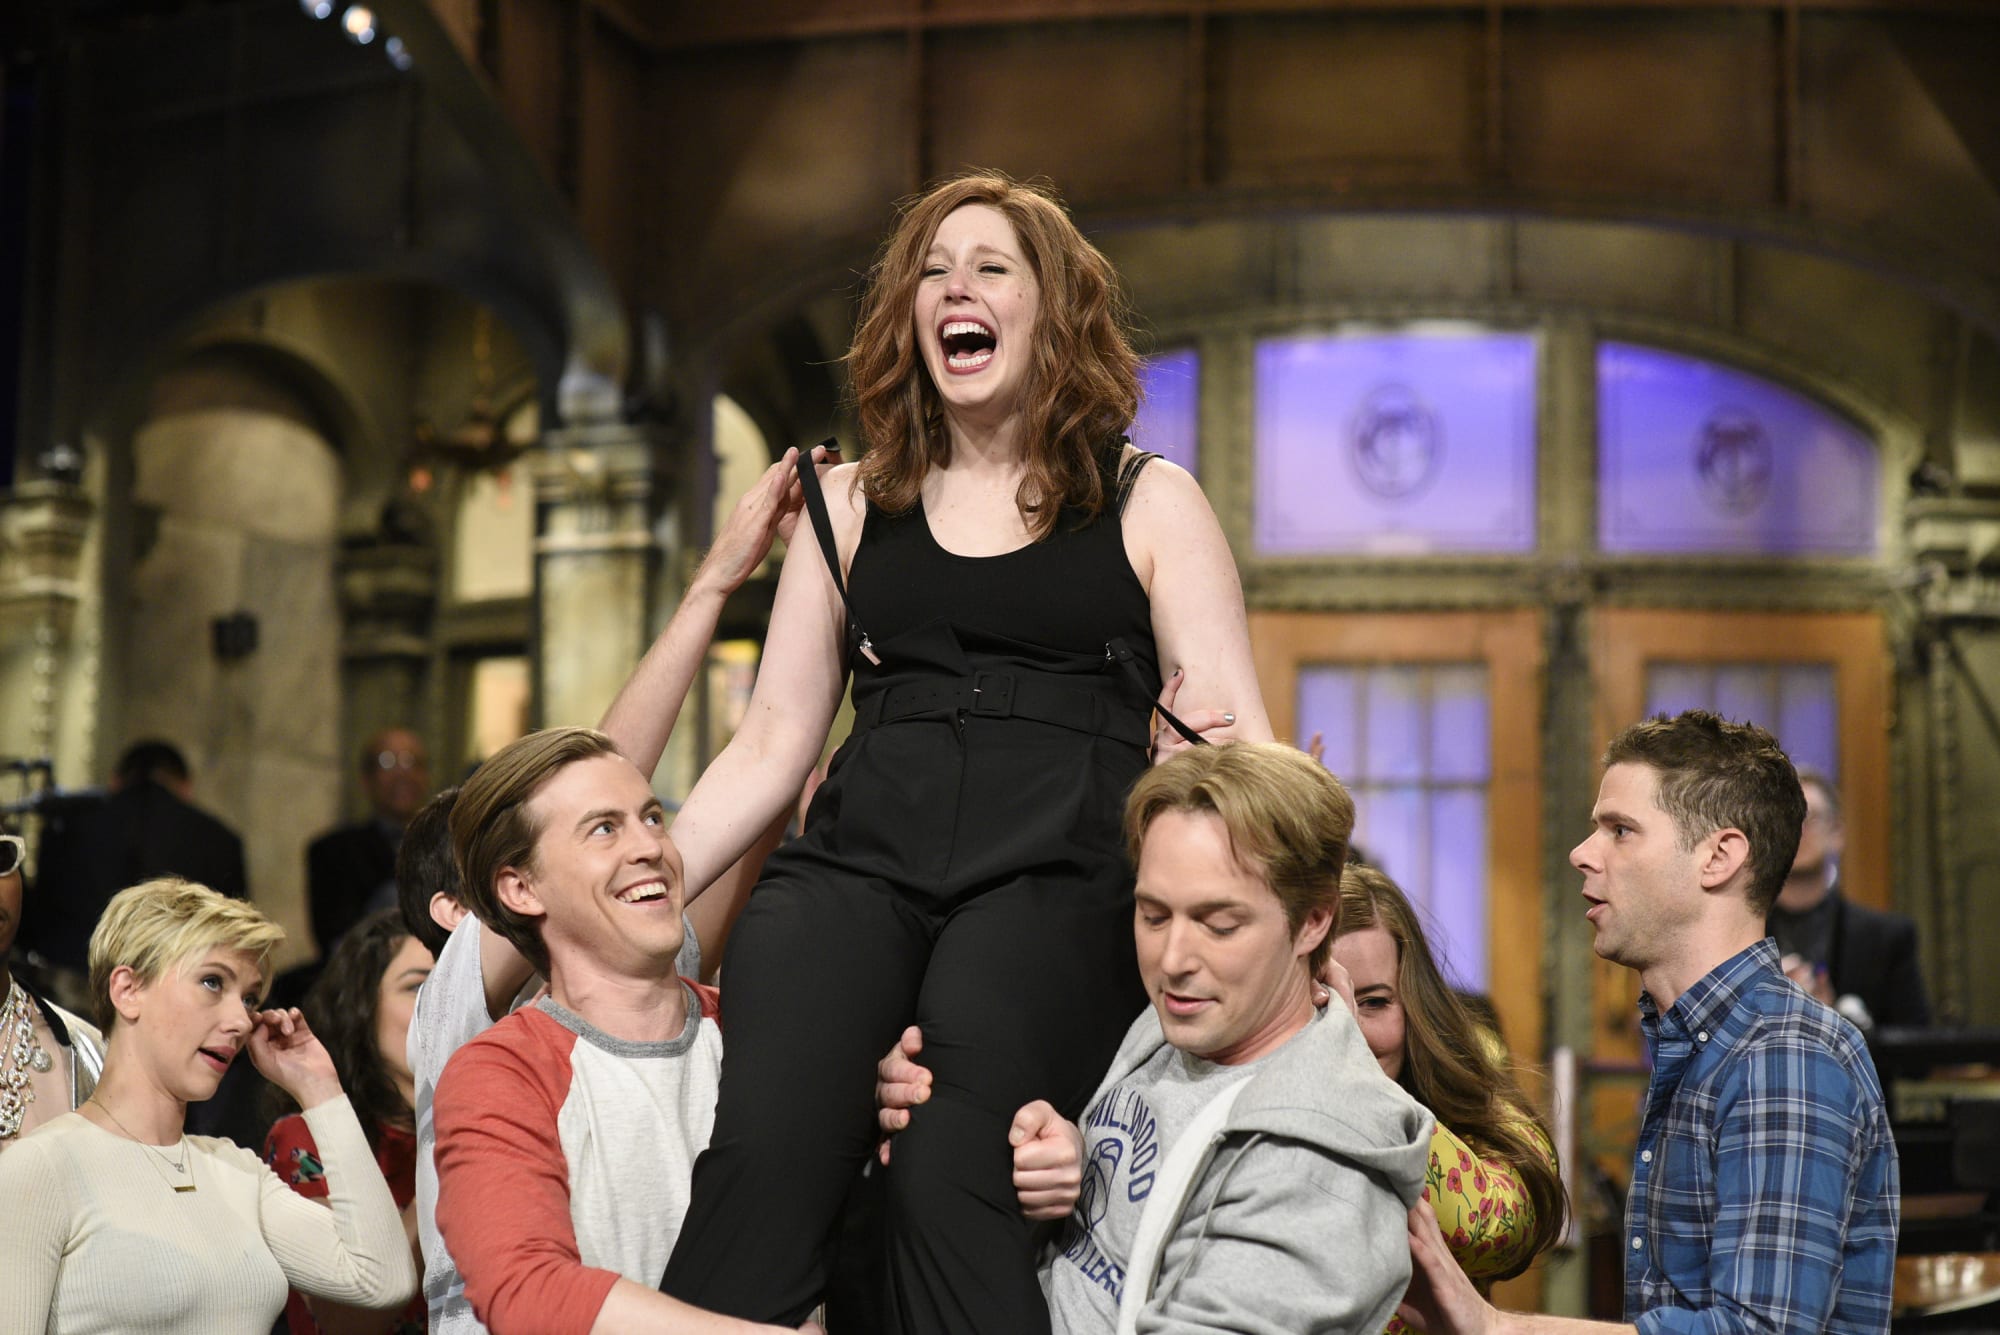 Saturday Night Live Hosts, musical guests announced for first 3 episodes